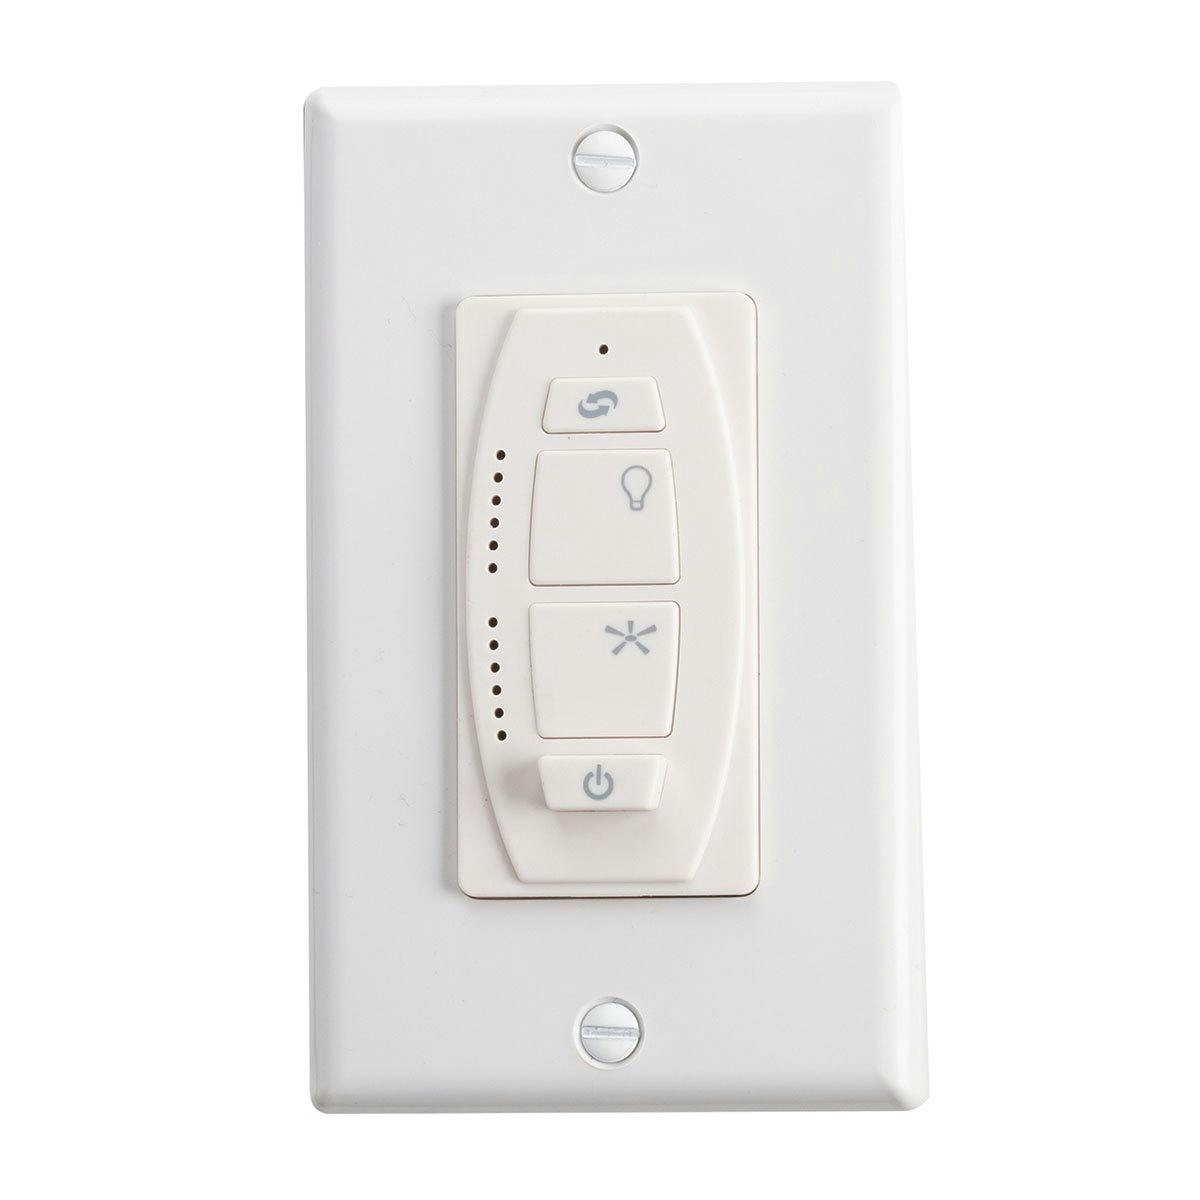 6 Speed DC Wall Transmitter Full Function White on a white background